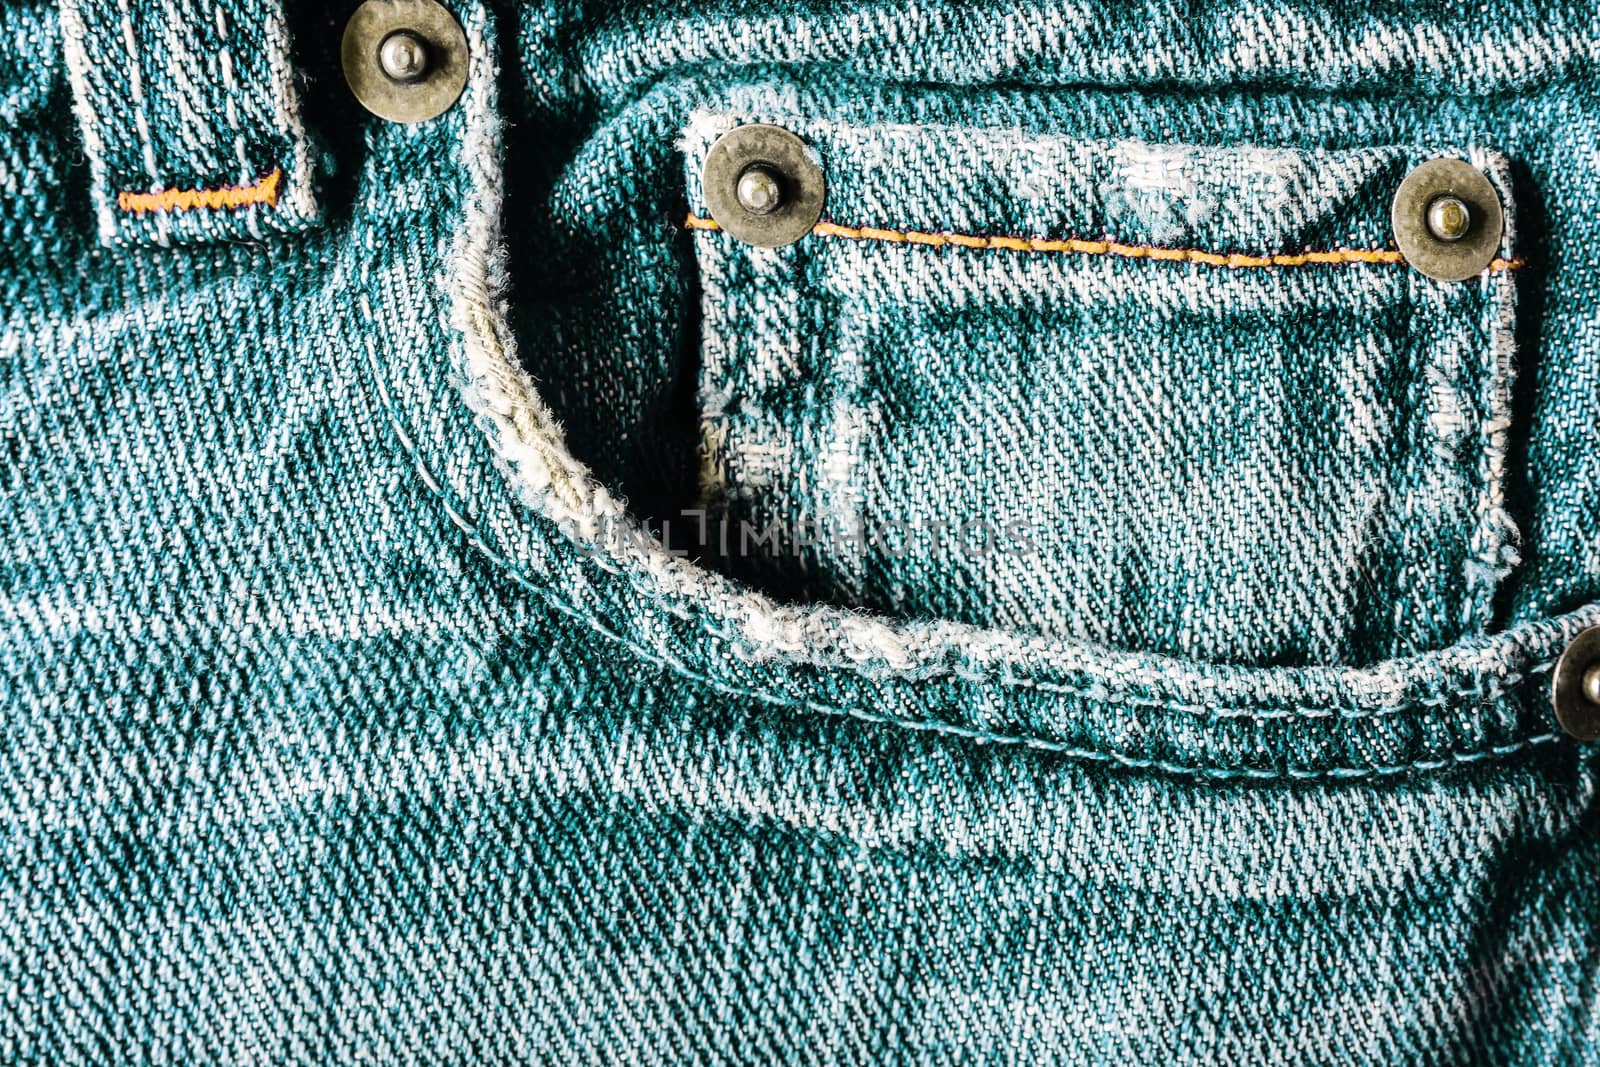 Jeans close-up, old, pocket back, front crumpled ragged
